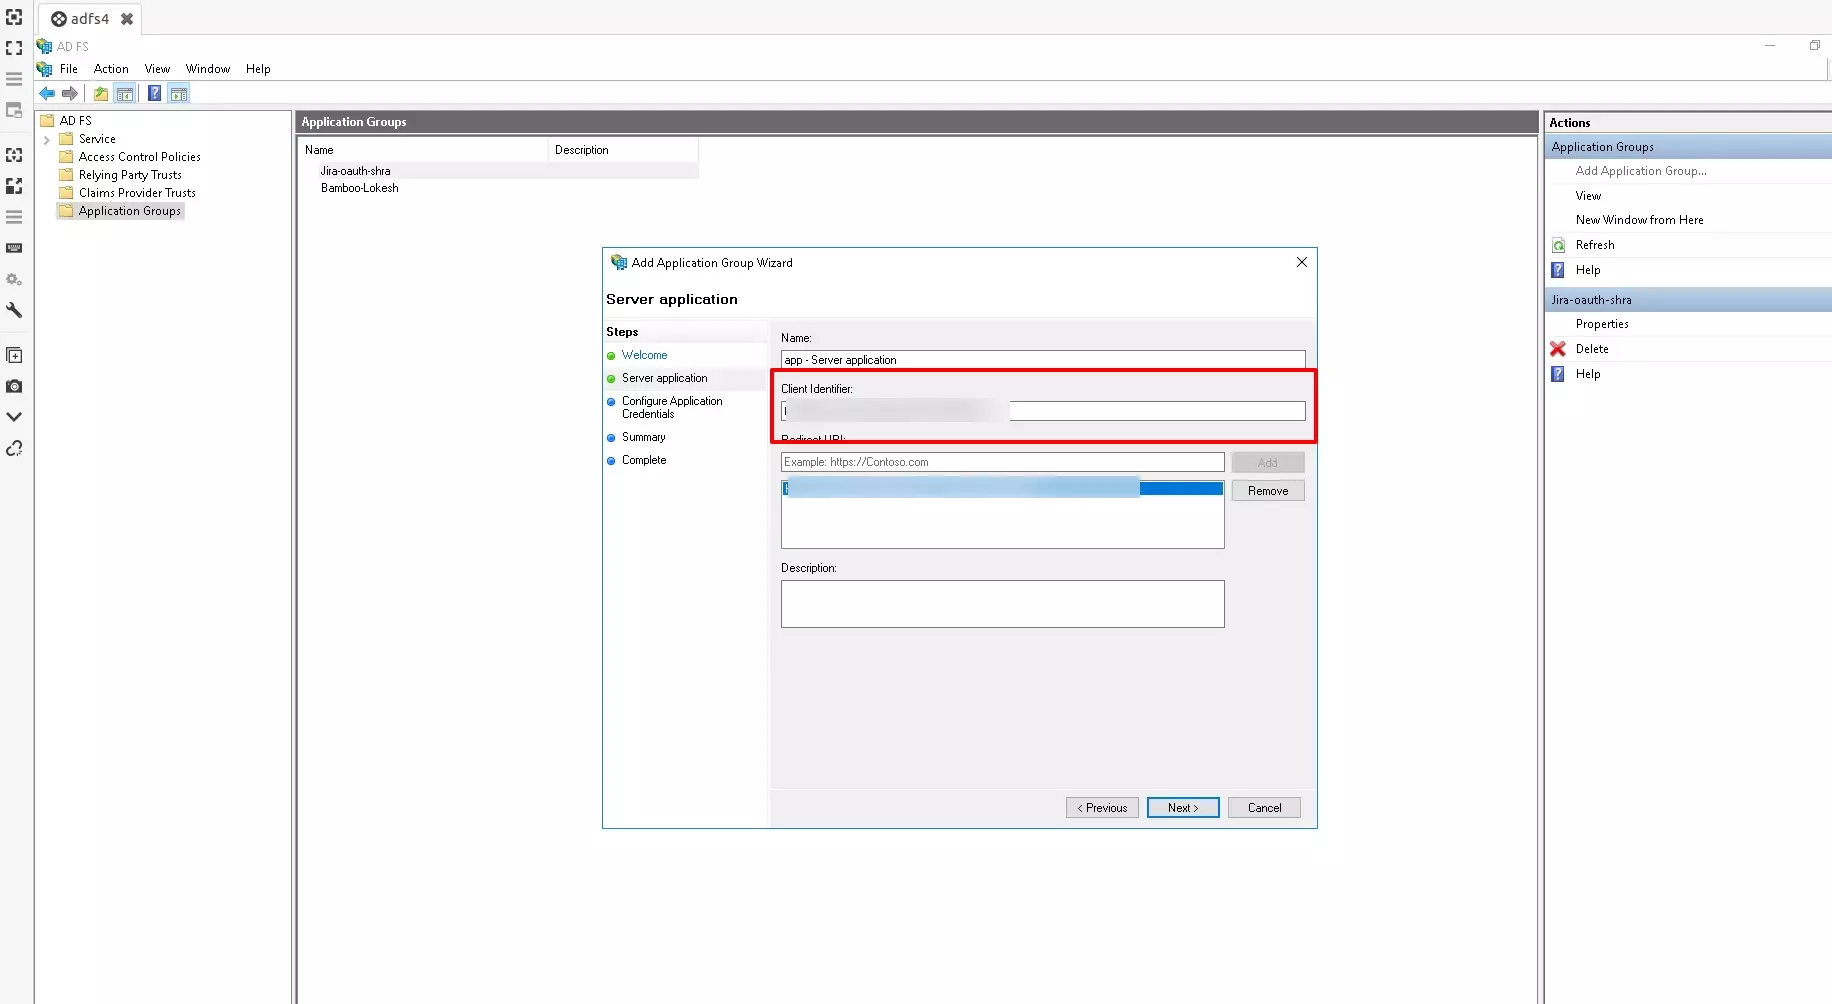 Single Sign On (SSO) using ADFS : Copy Client Identifier